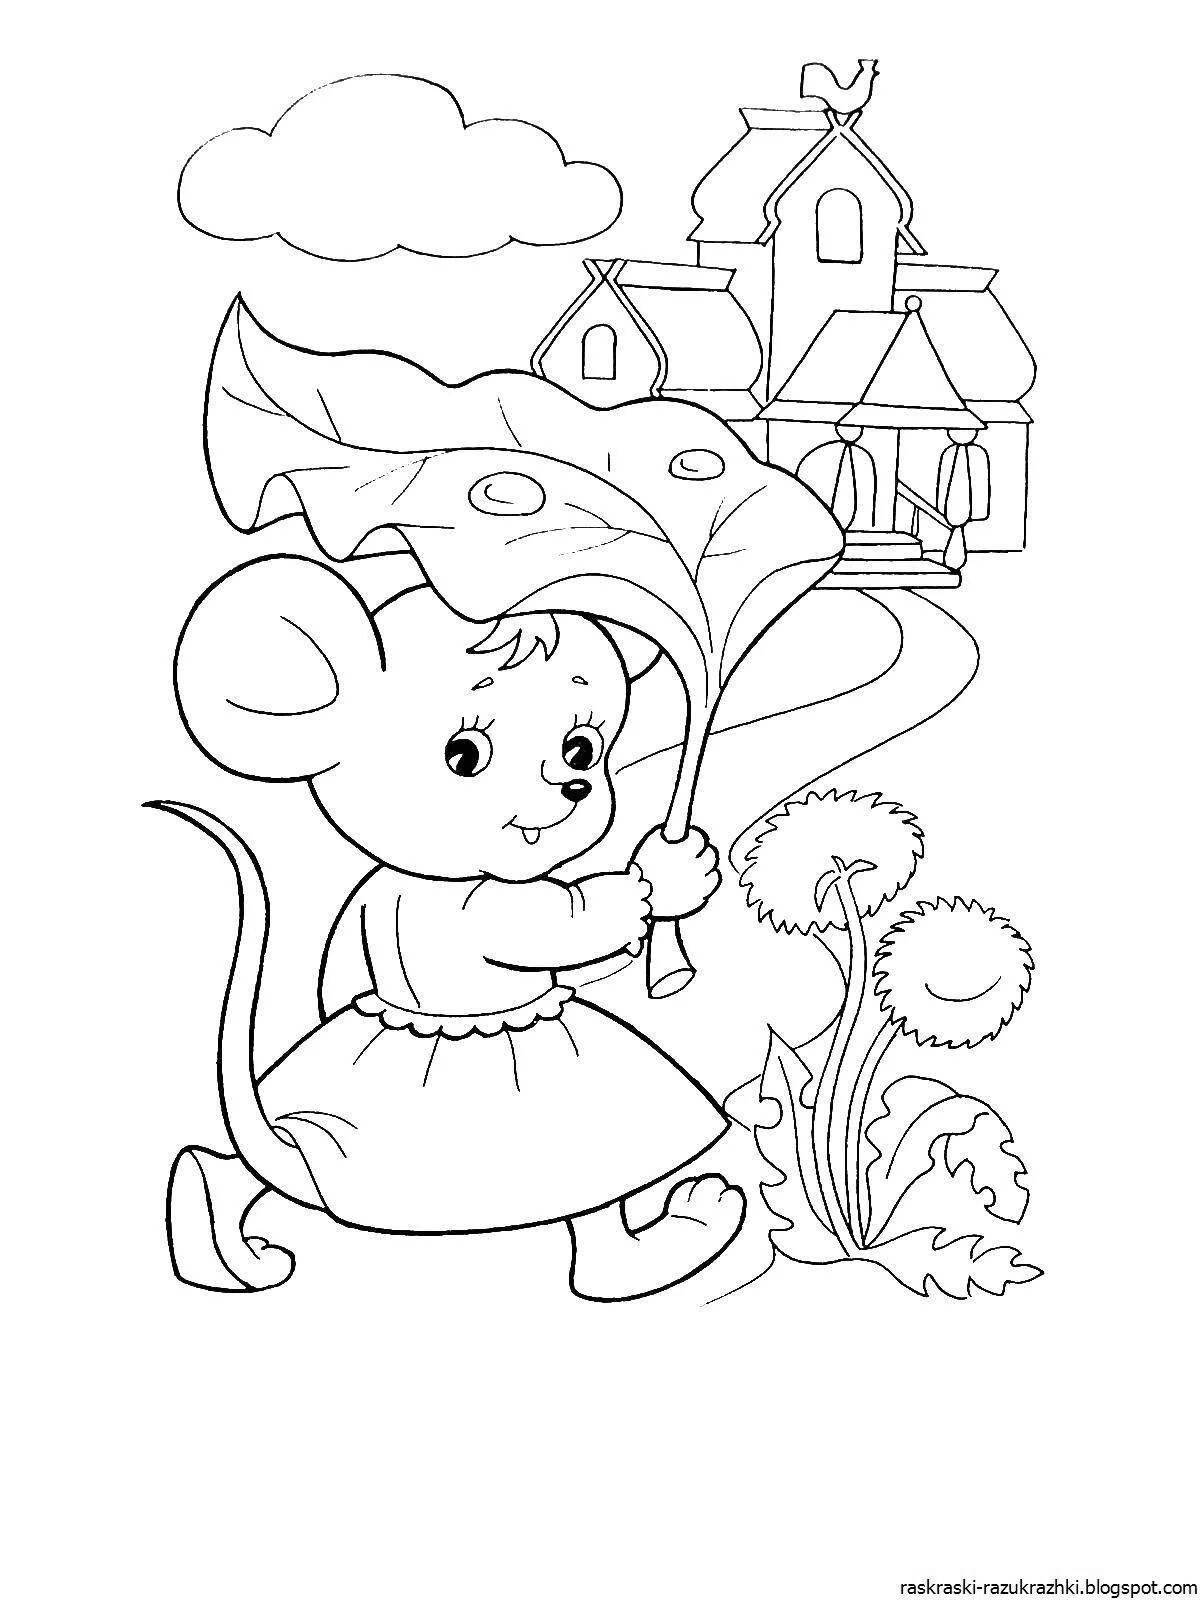 Amazing fairy tale coloring book for kids